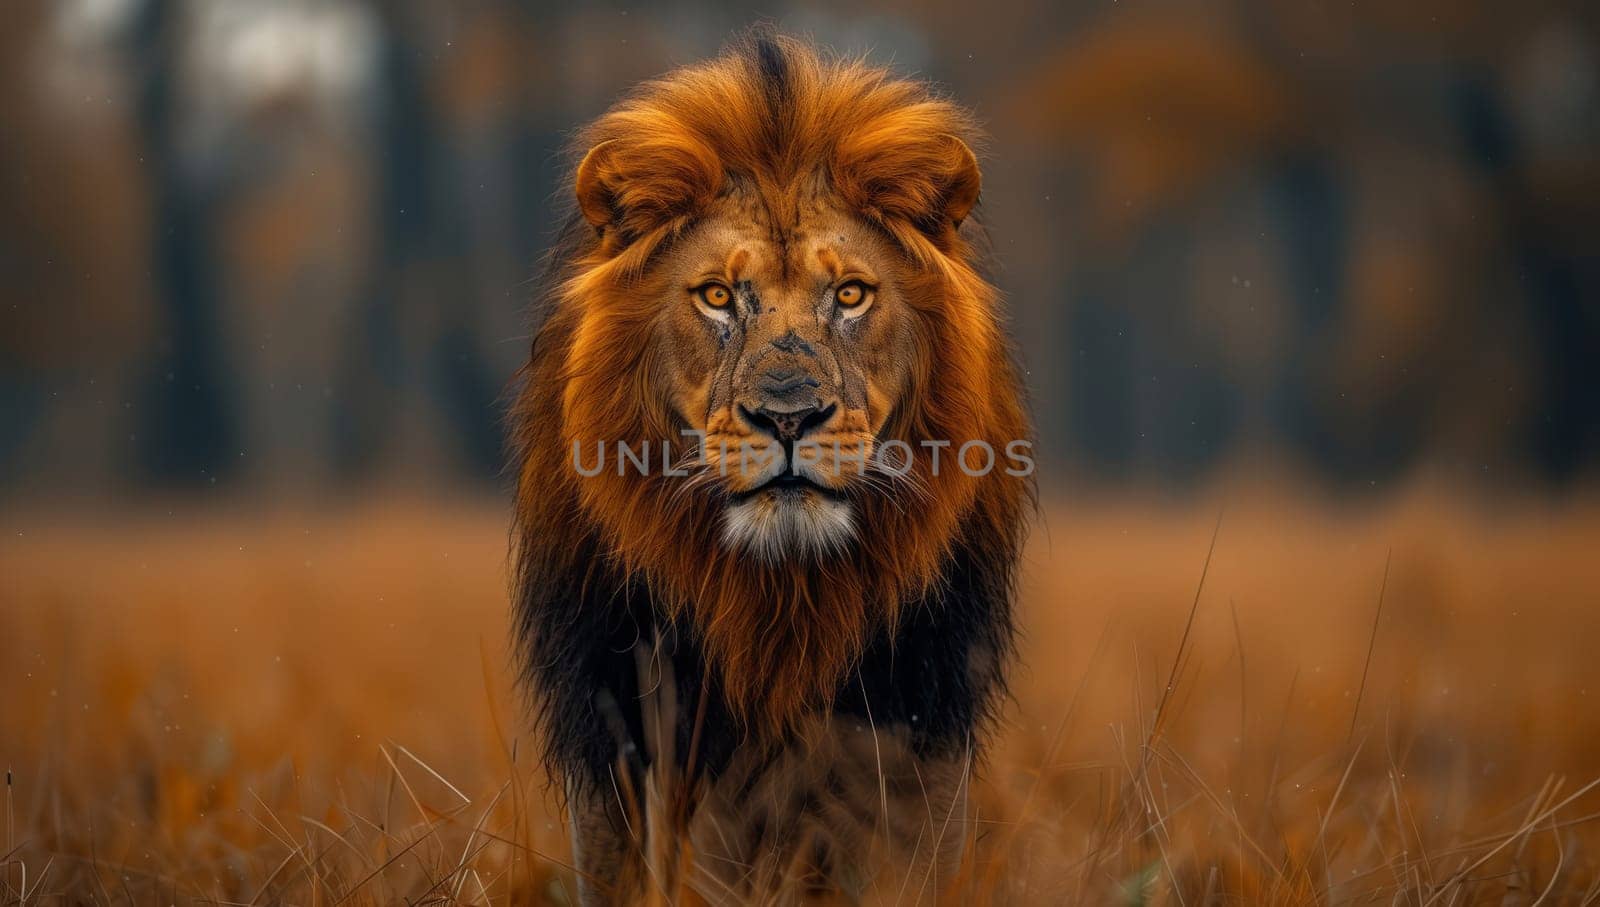 a lion is standing in a field of dry grass looking at the camera by richwolf